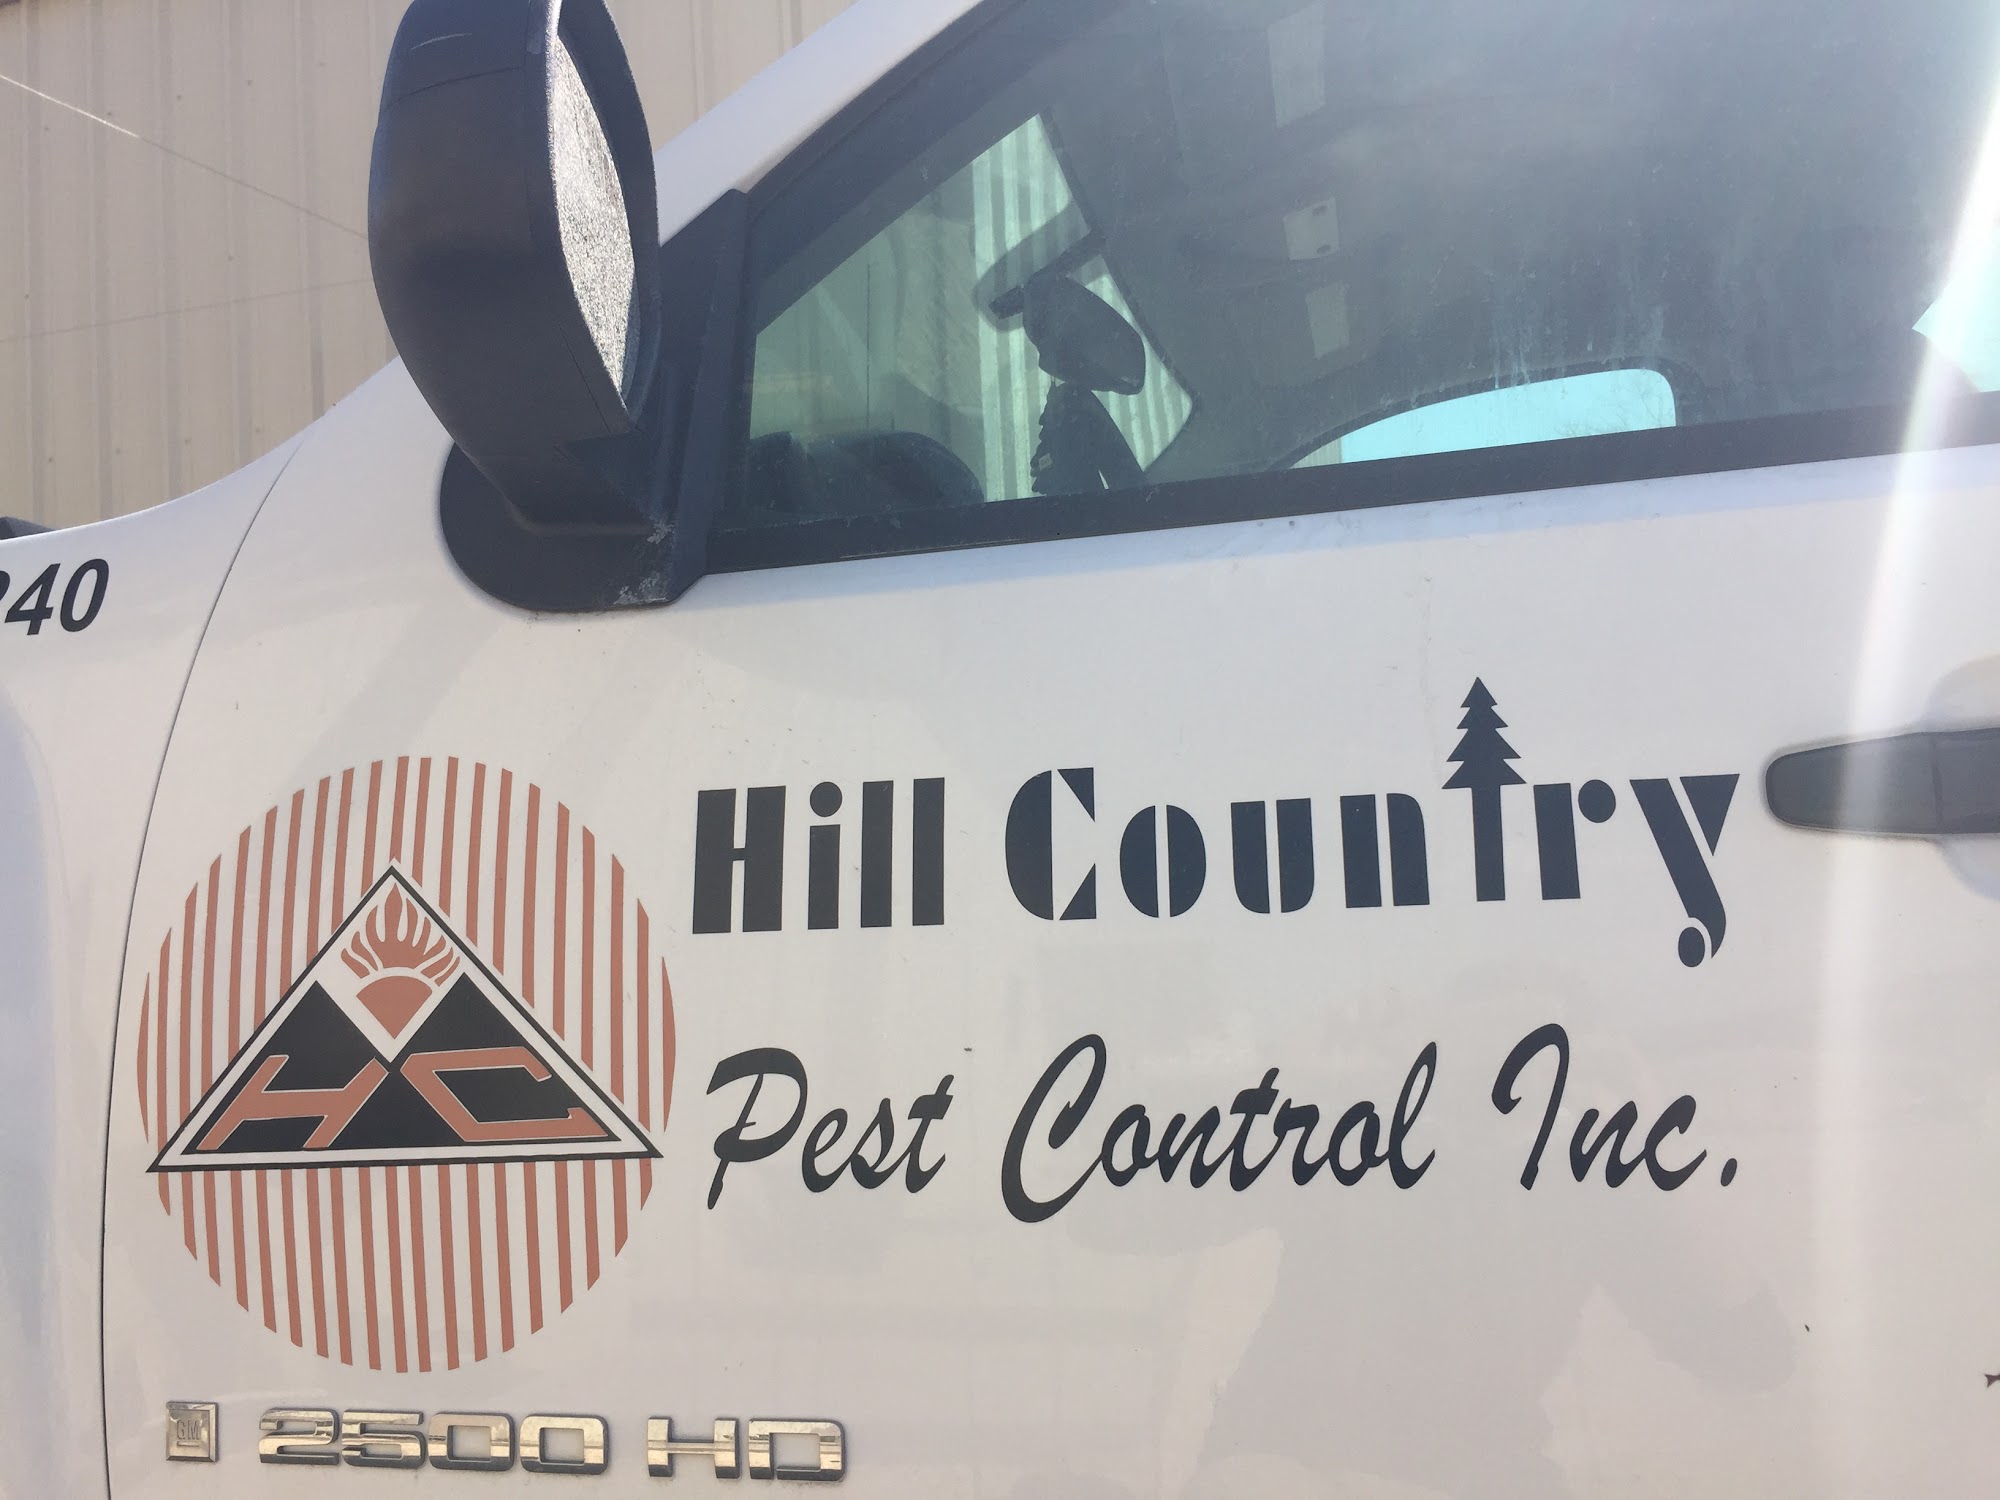 Hill Country Pest Control Inc